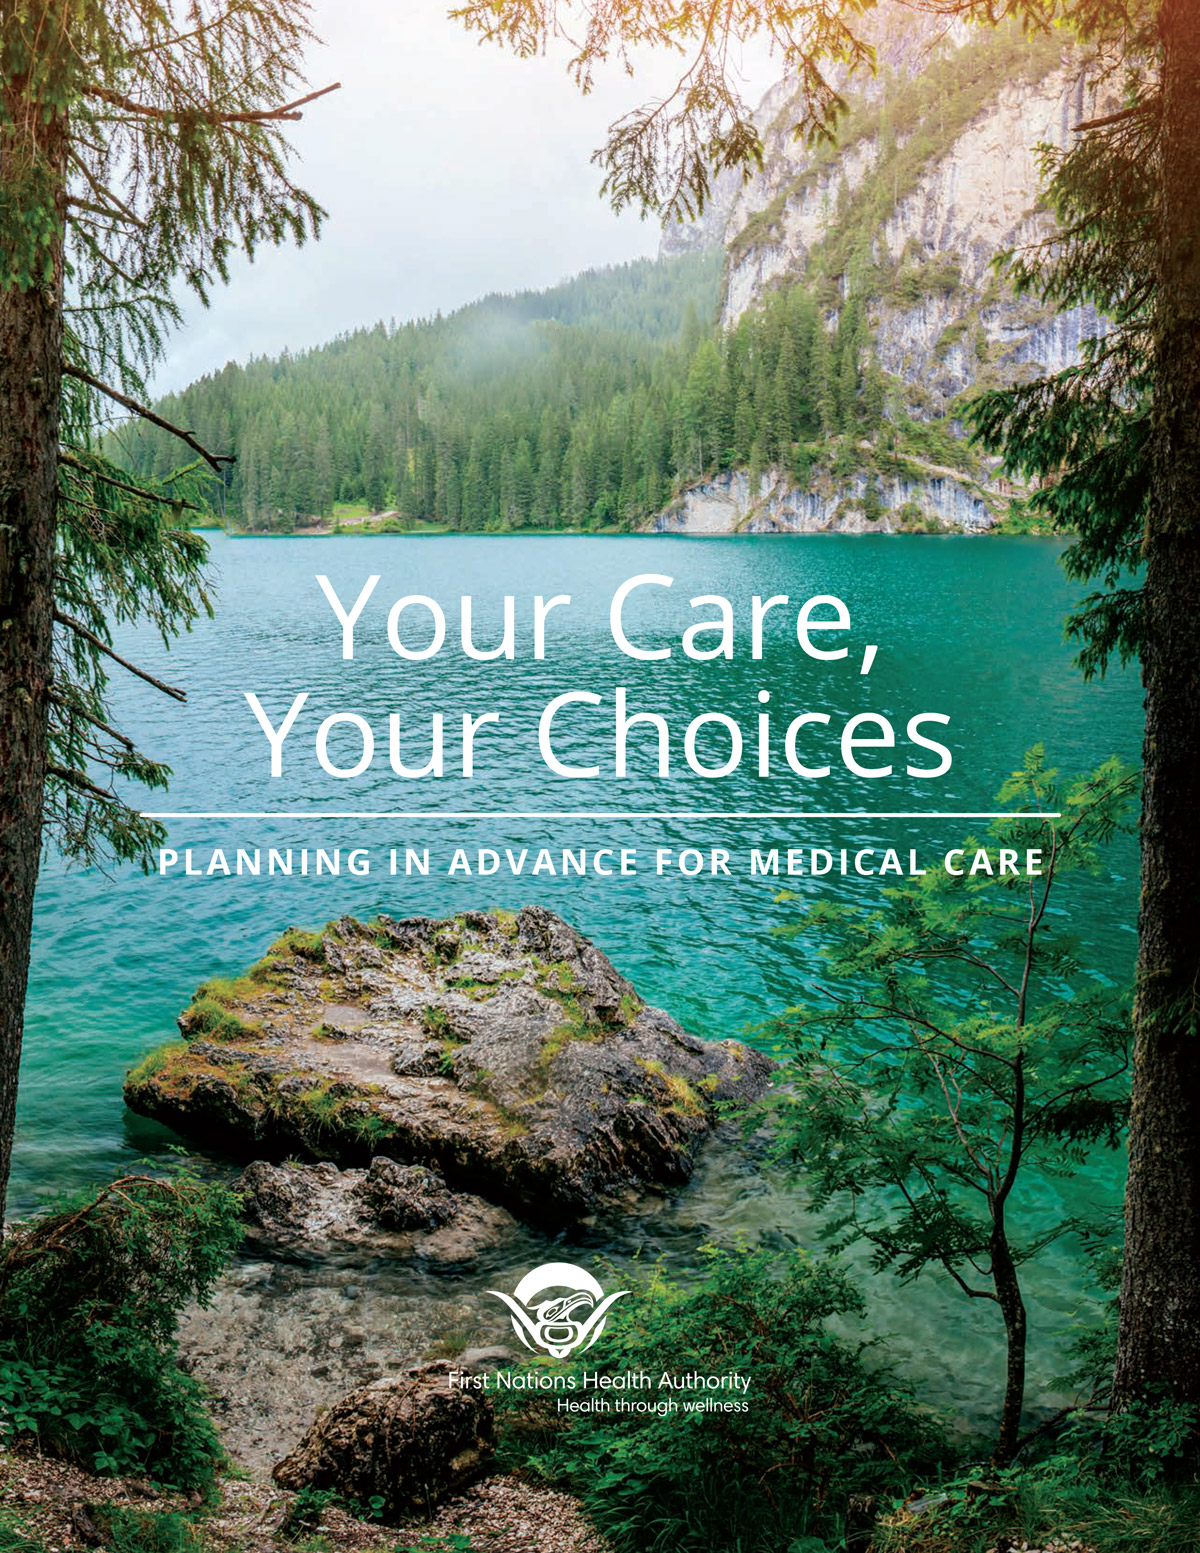 FNHA-Your-Care-Your-Choices-Planning-in-Advance-for-Medical-Care-Cover.jpg